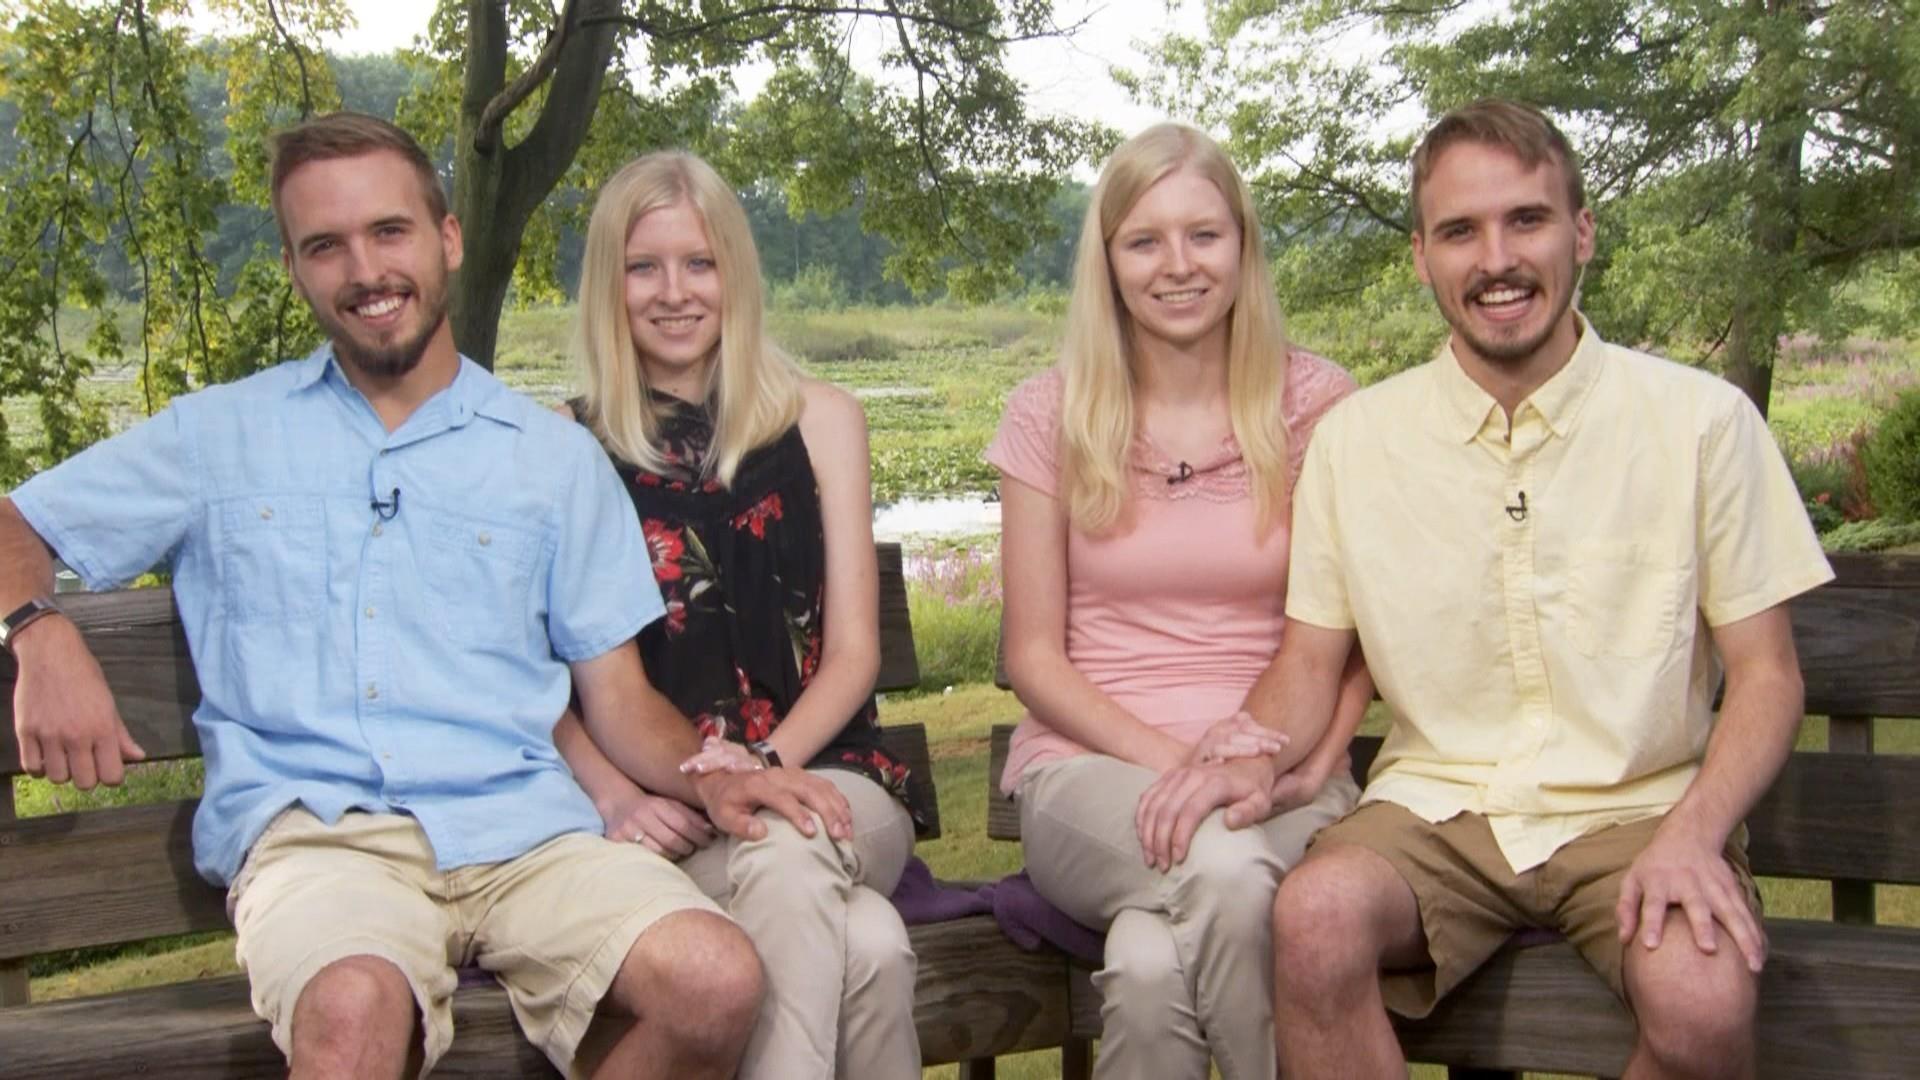 Identical Twin Brothers Marrying Identical Twin Sisters.